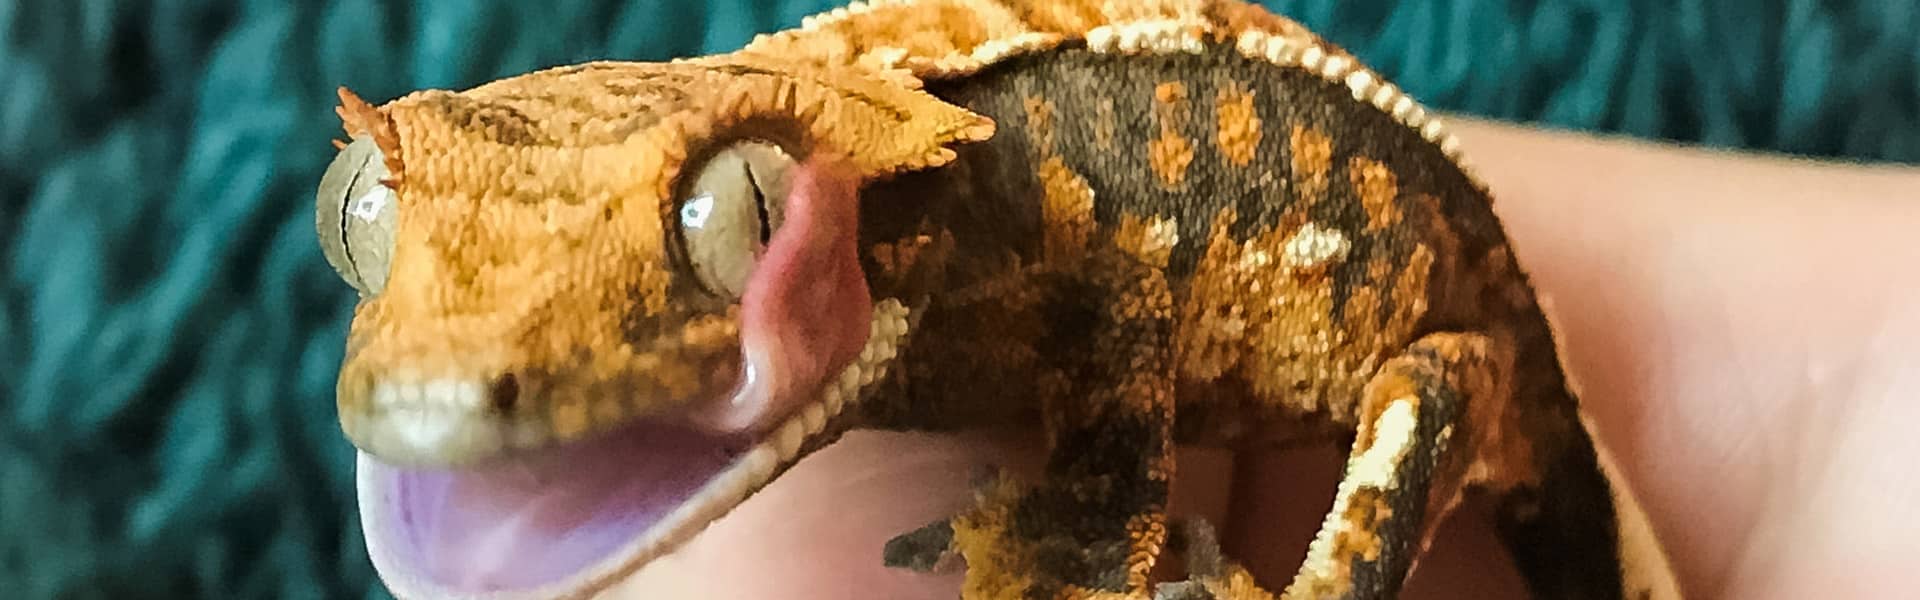 Crested Gecko licking its eye